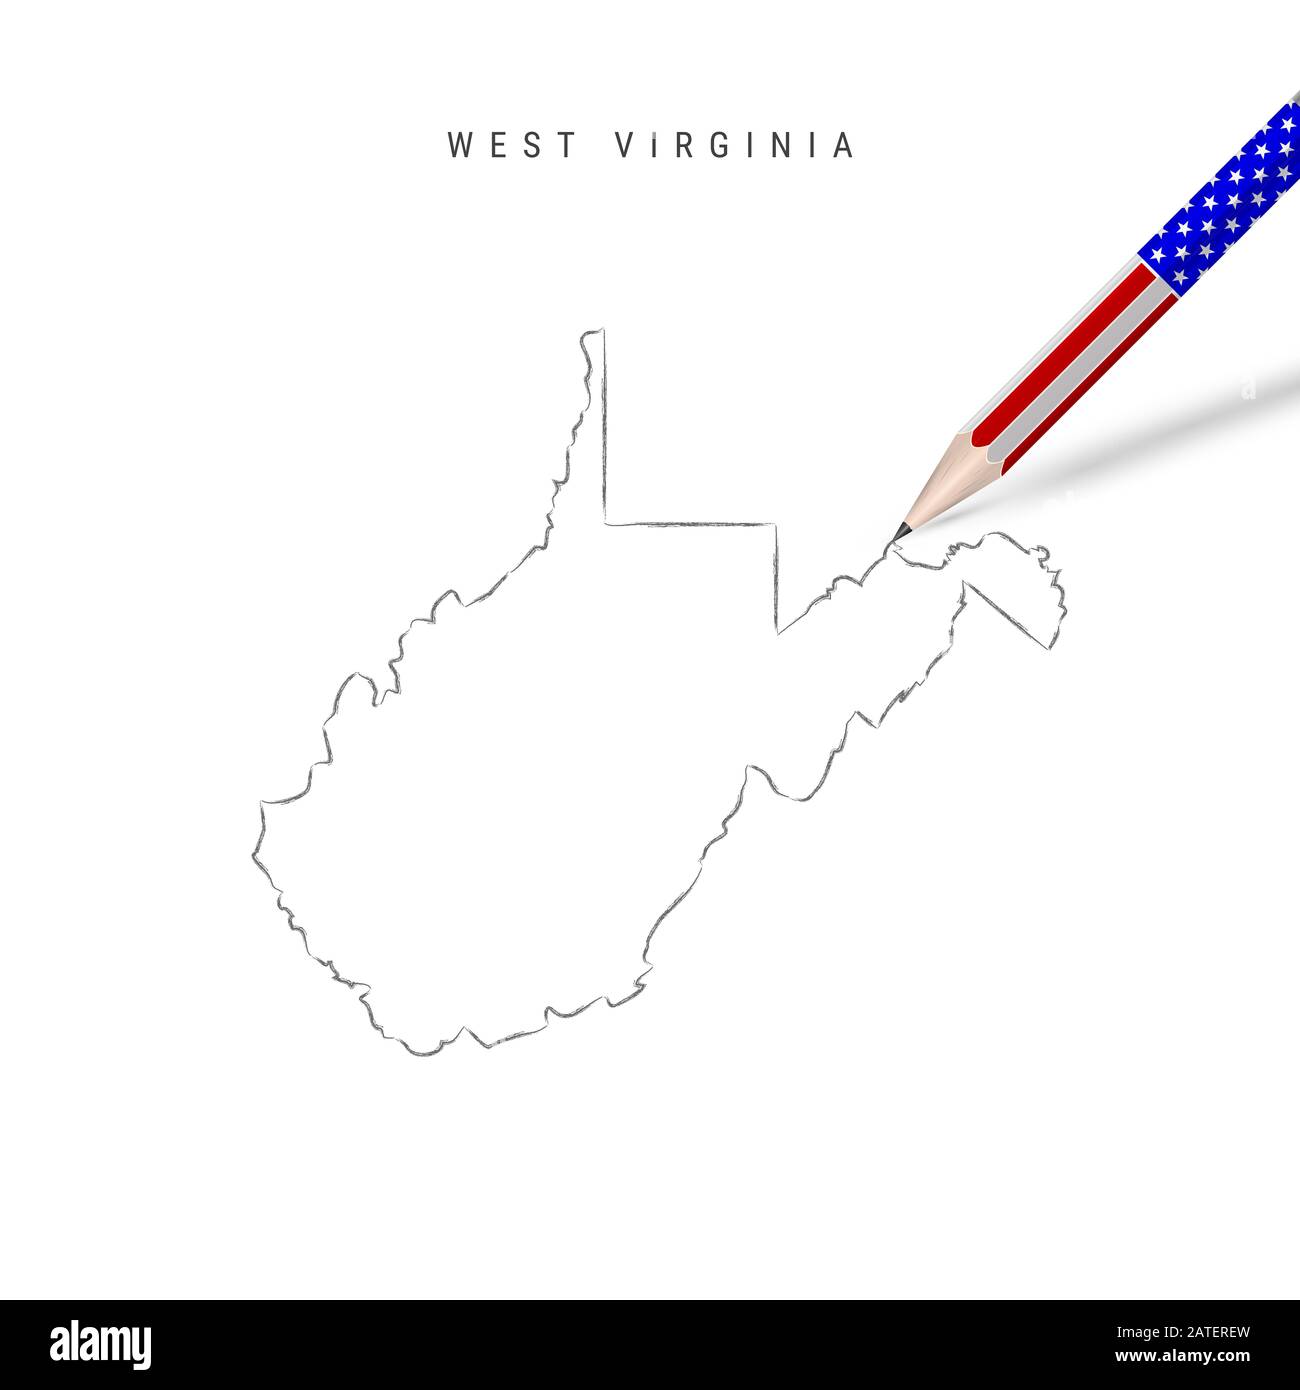 West Virginia US state map pencil sketch. West Virginia outline contour map with 3D pencil in american flag colors. Freehand drawing , hand drawn sket Stock Photo